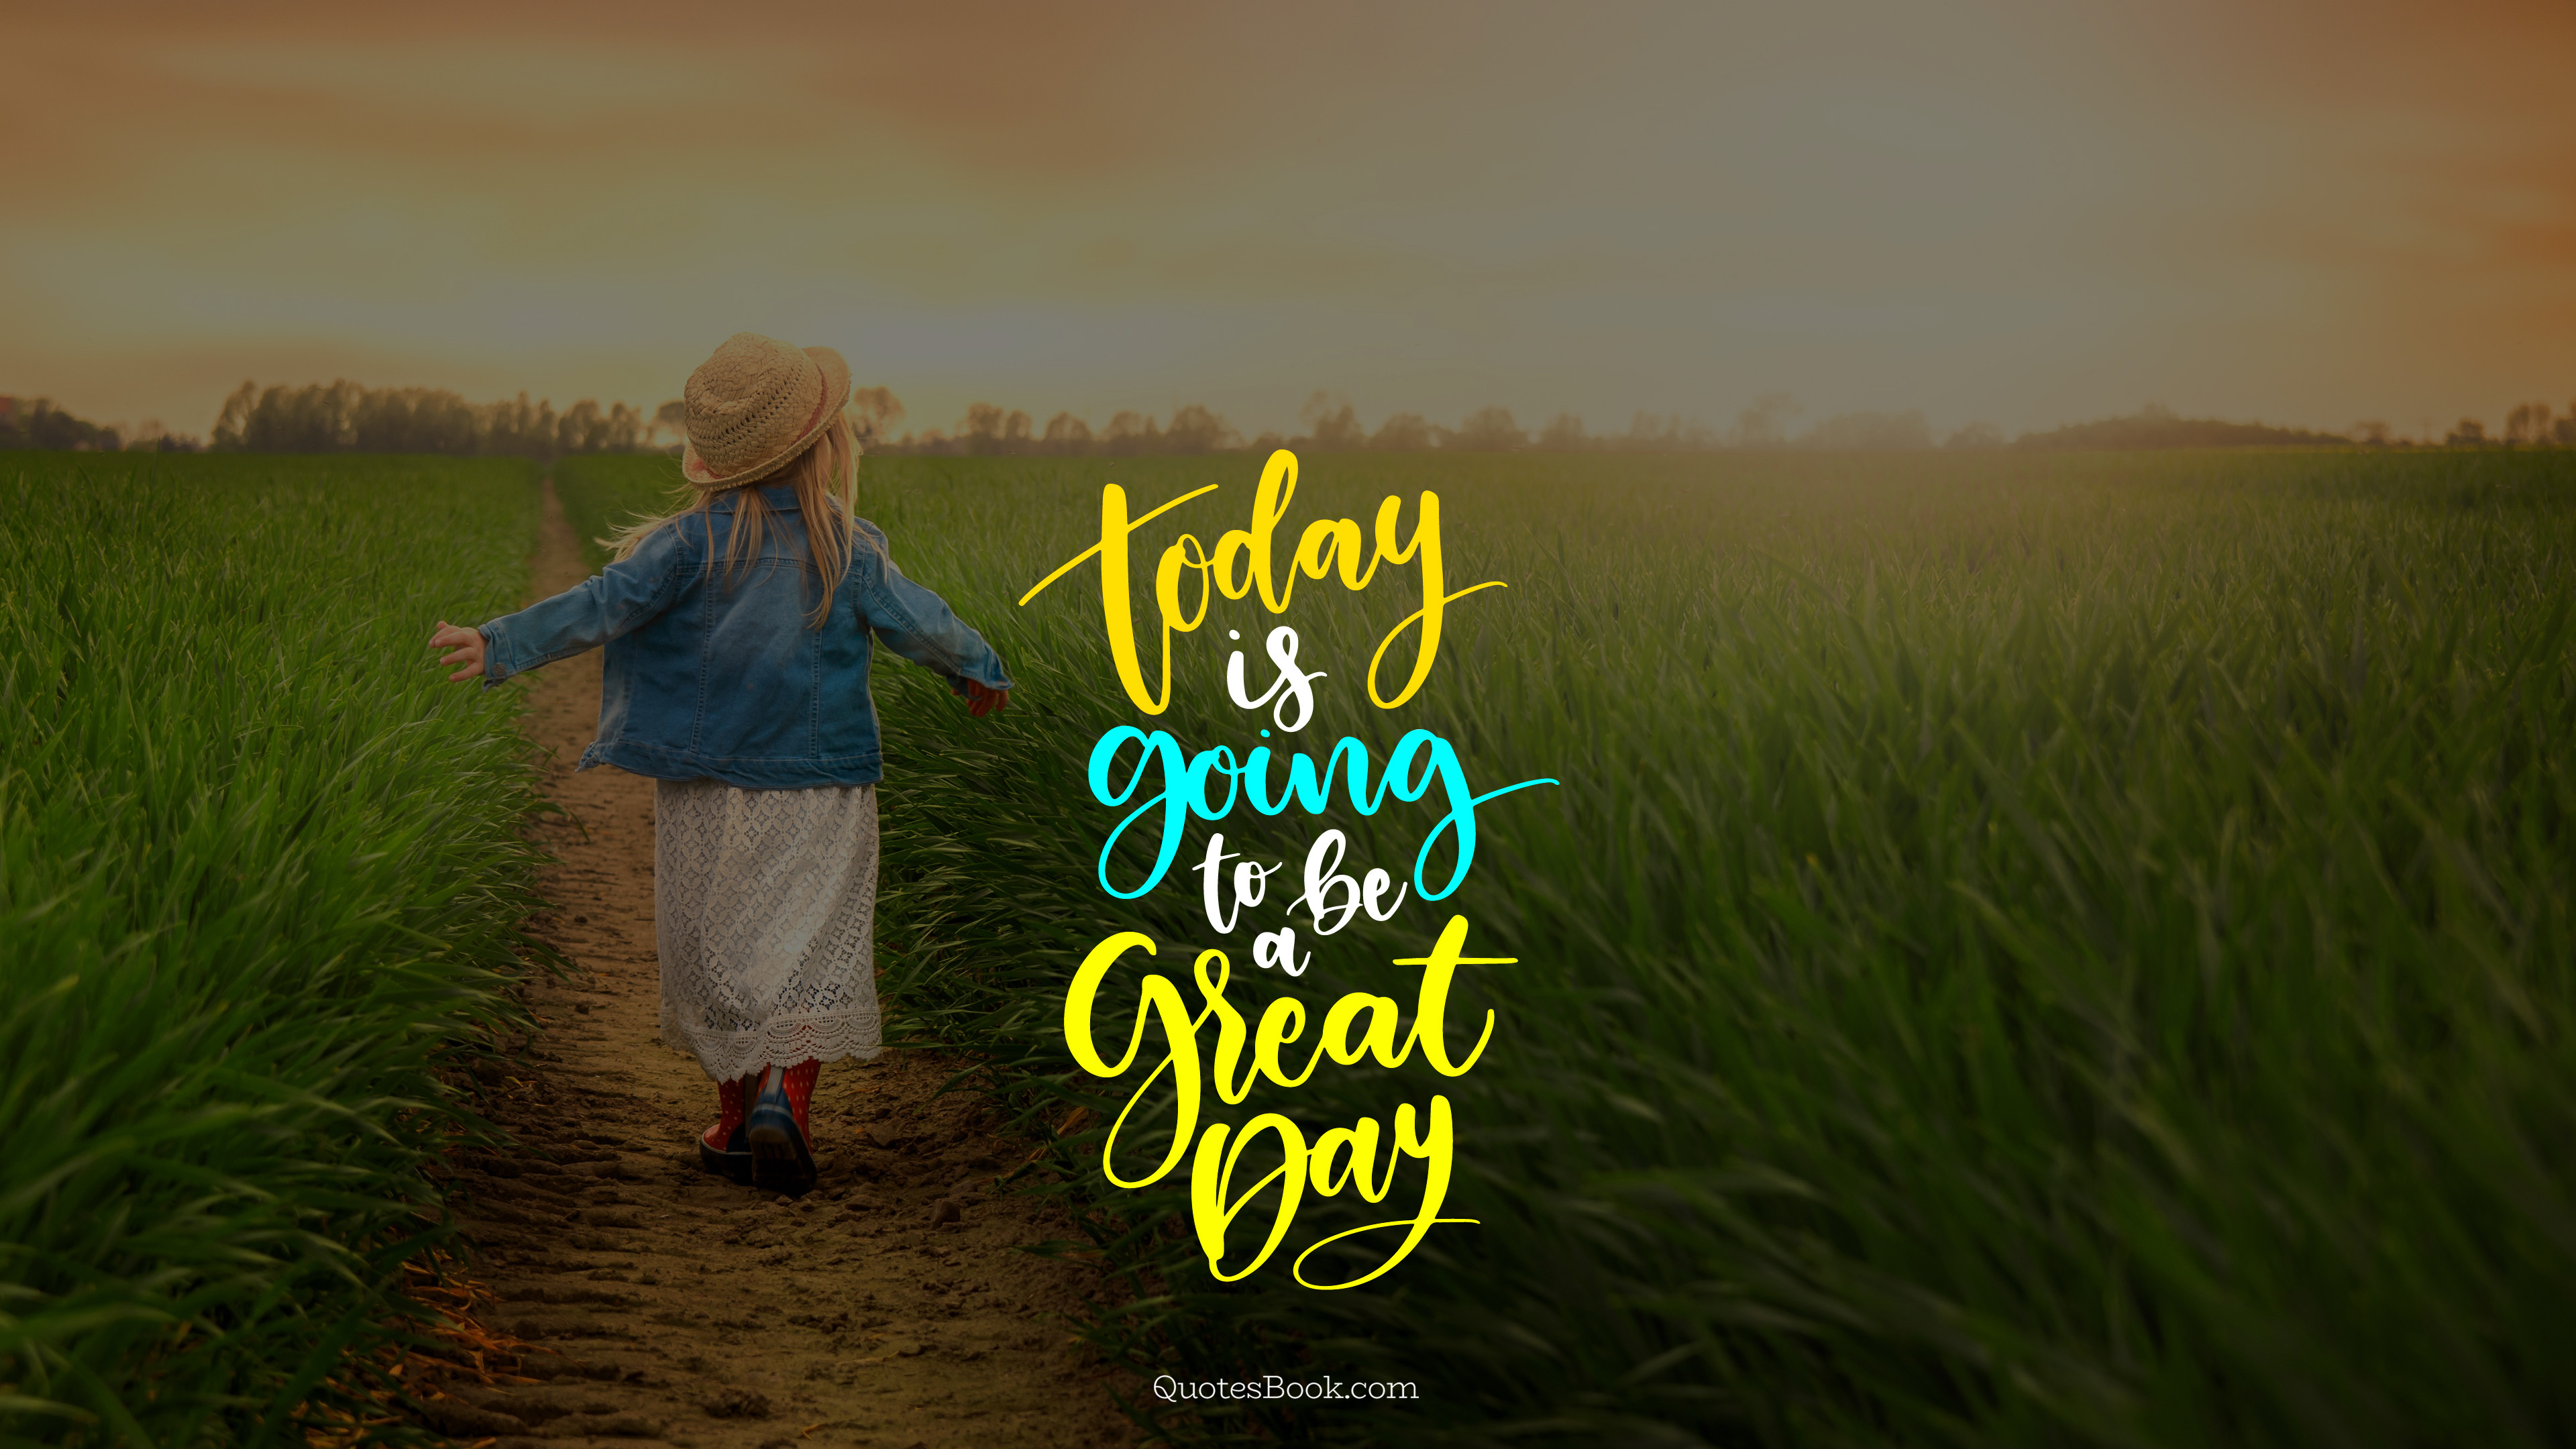 Today is going to be a great day - QuotesBook